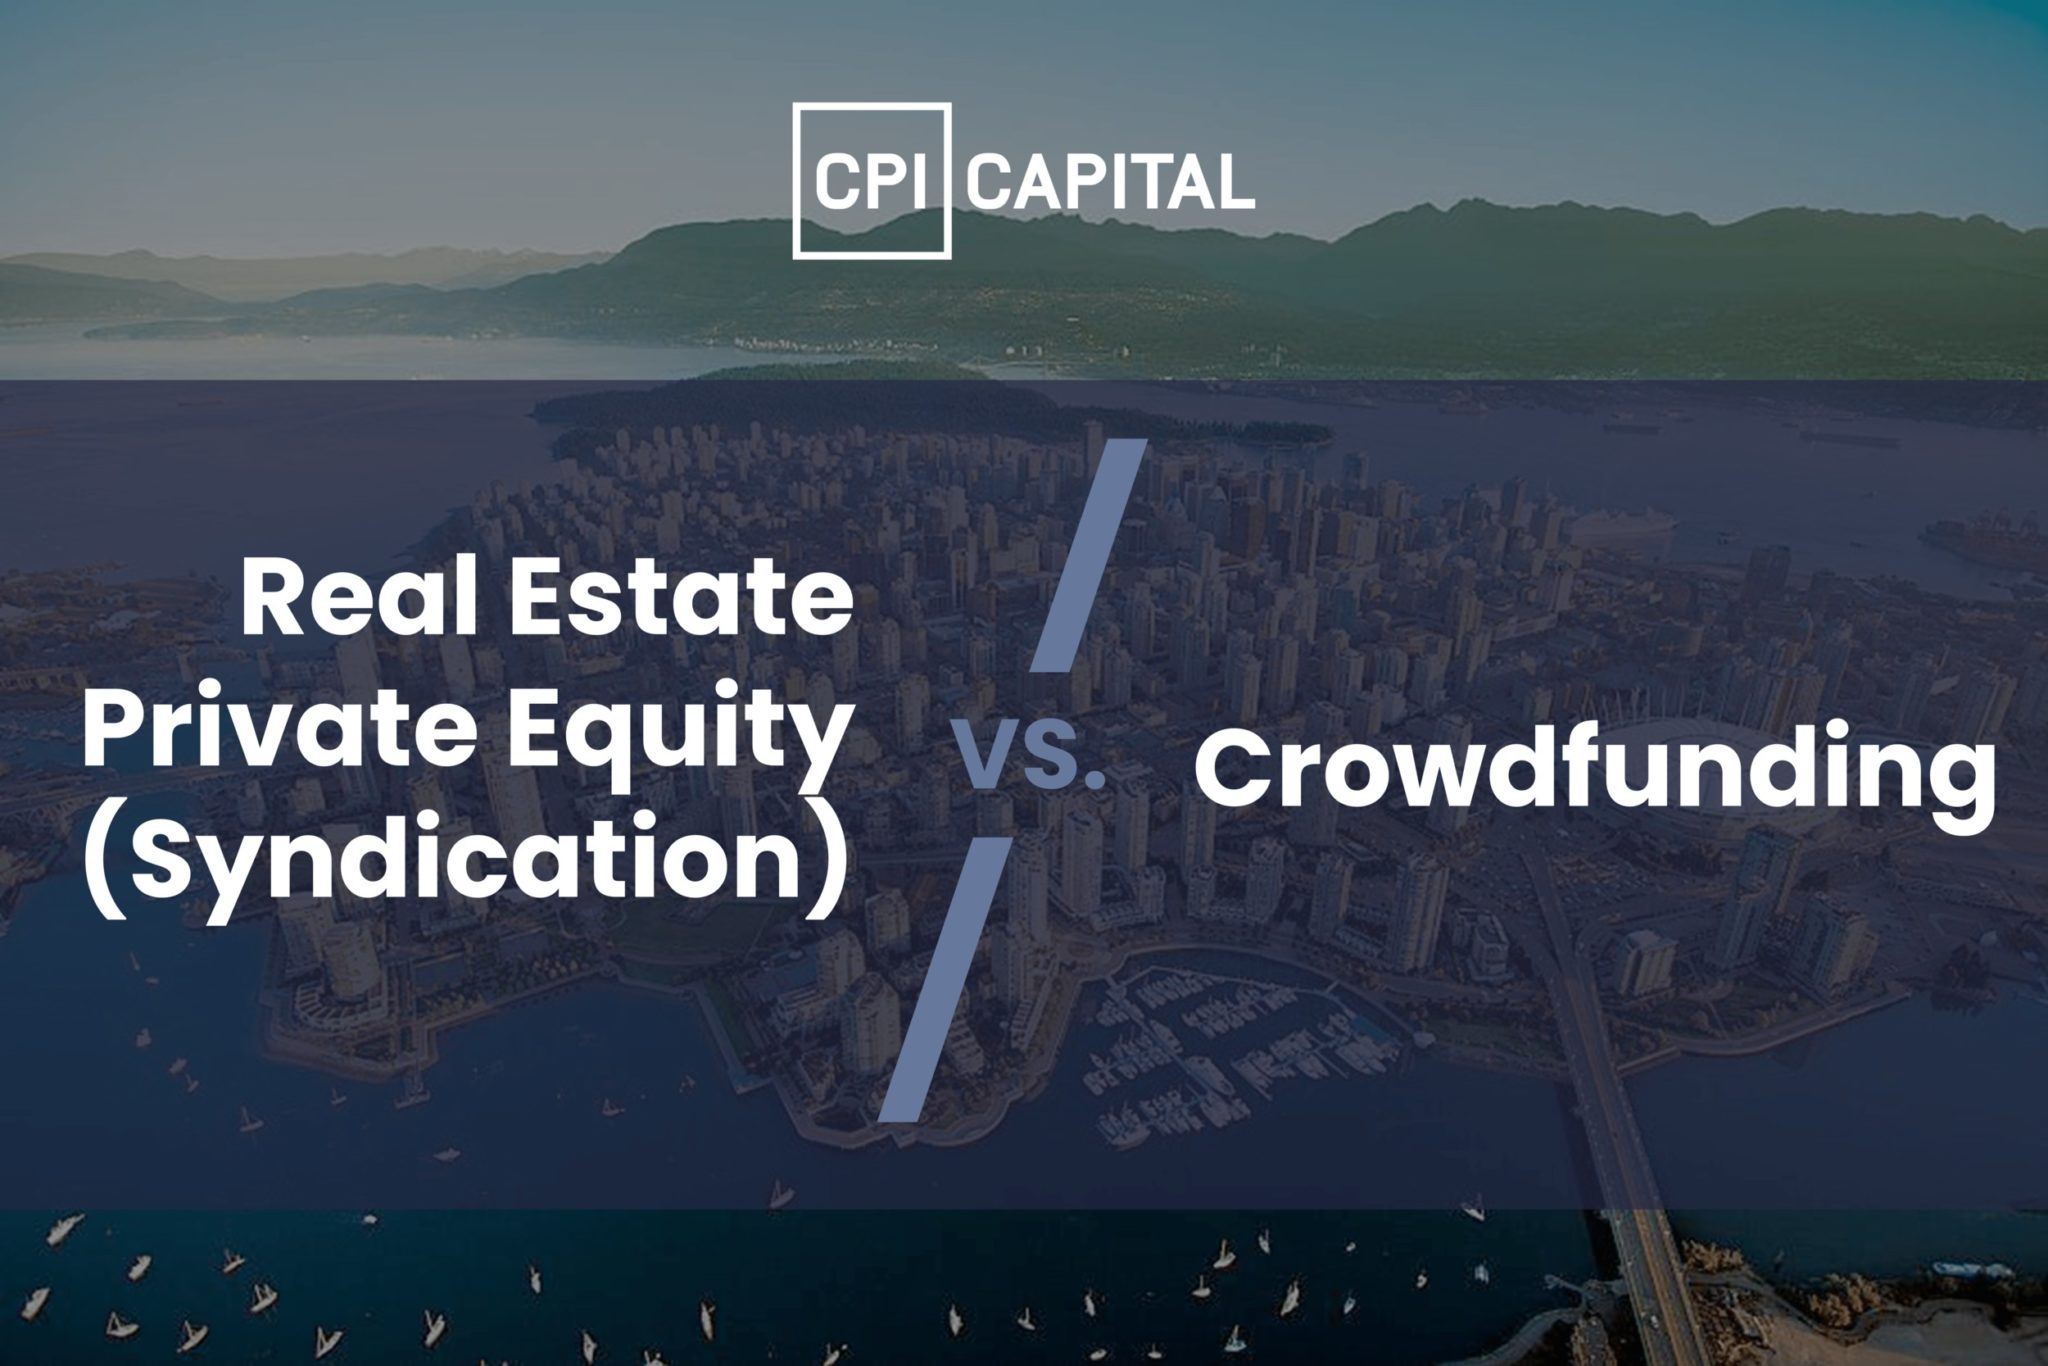 Real Estate Private Equity (Syndication) vs. Crowdfunding